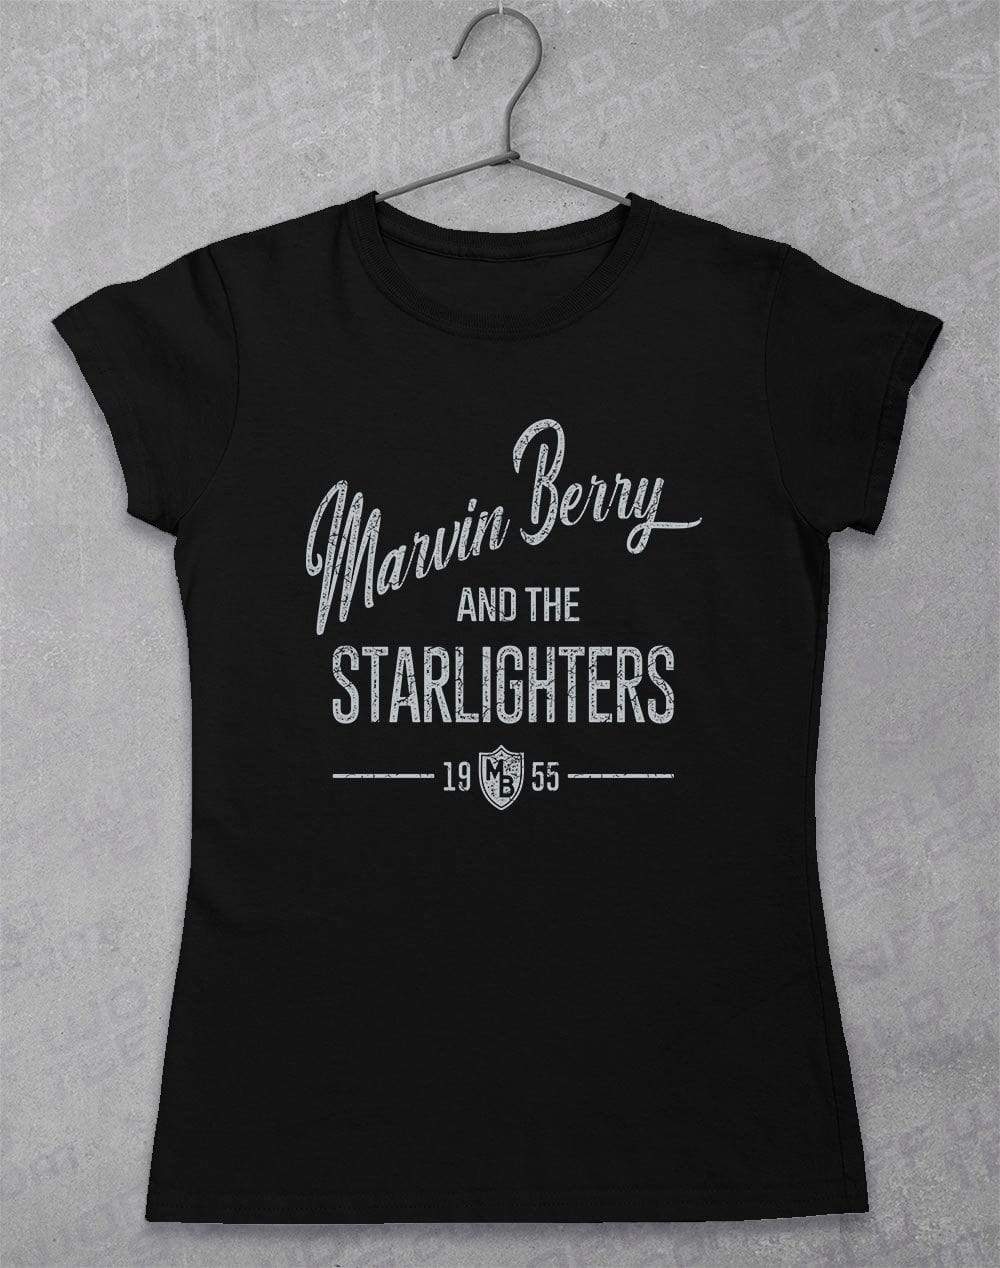 Marvin Berry and the Starlighters Women's T-Shirt  - Off World Tees